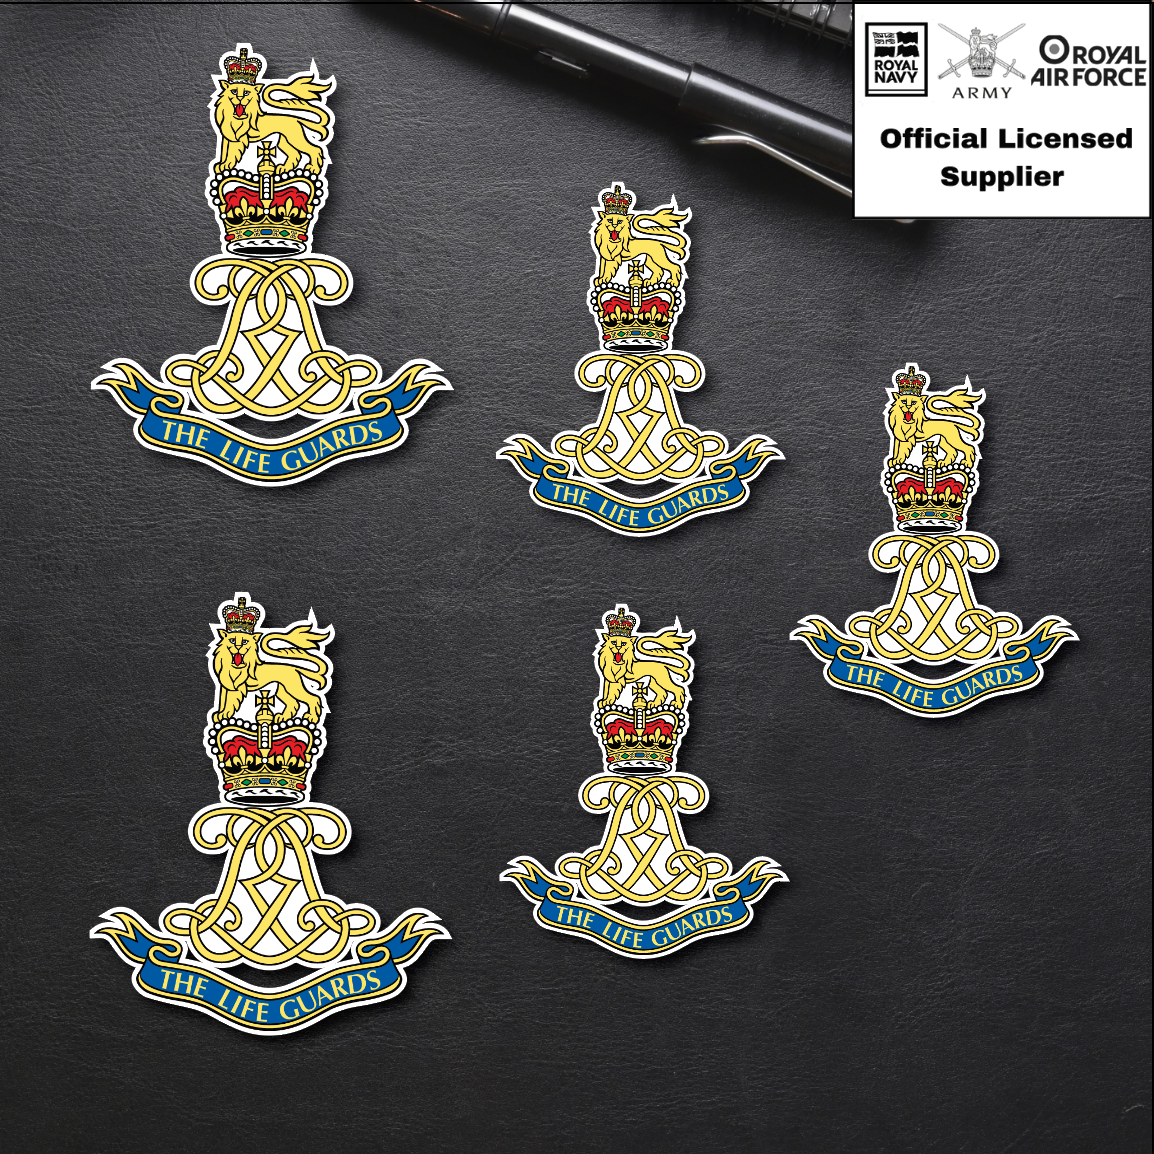 5 x The Life Guards Vinyl Stickers - 2x 75mm, 3x 50mm - Official MoD Reseller - Picture 1 of 4